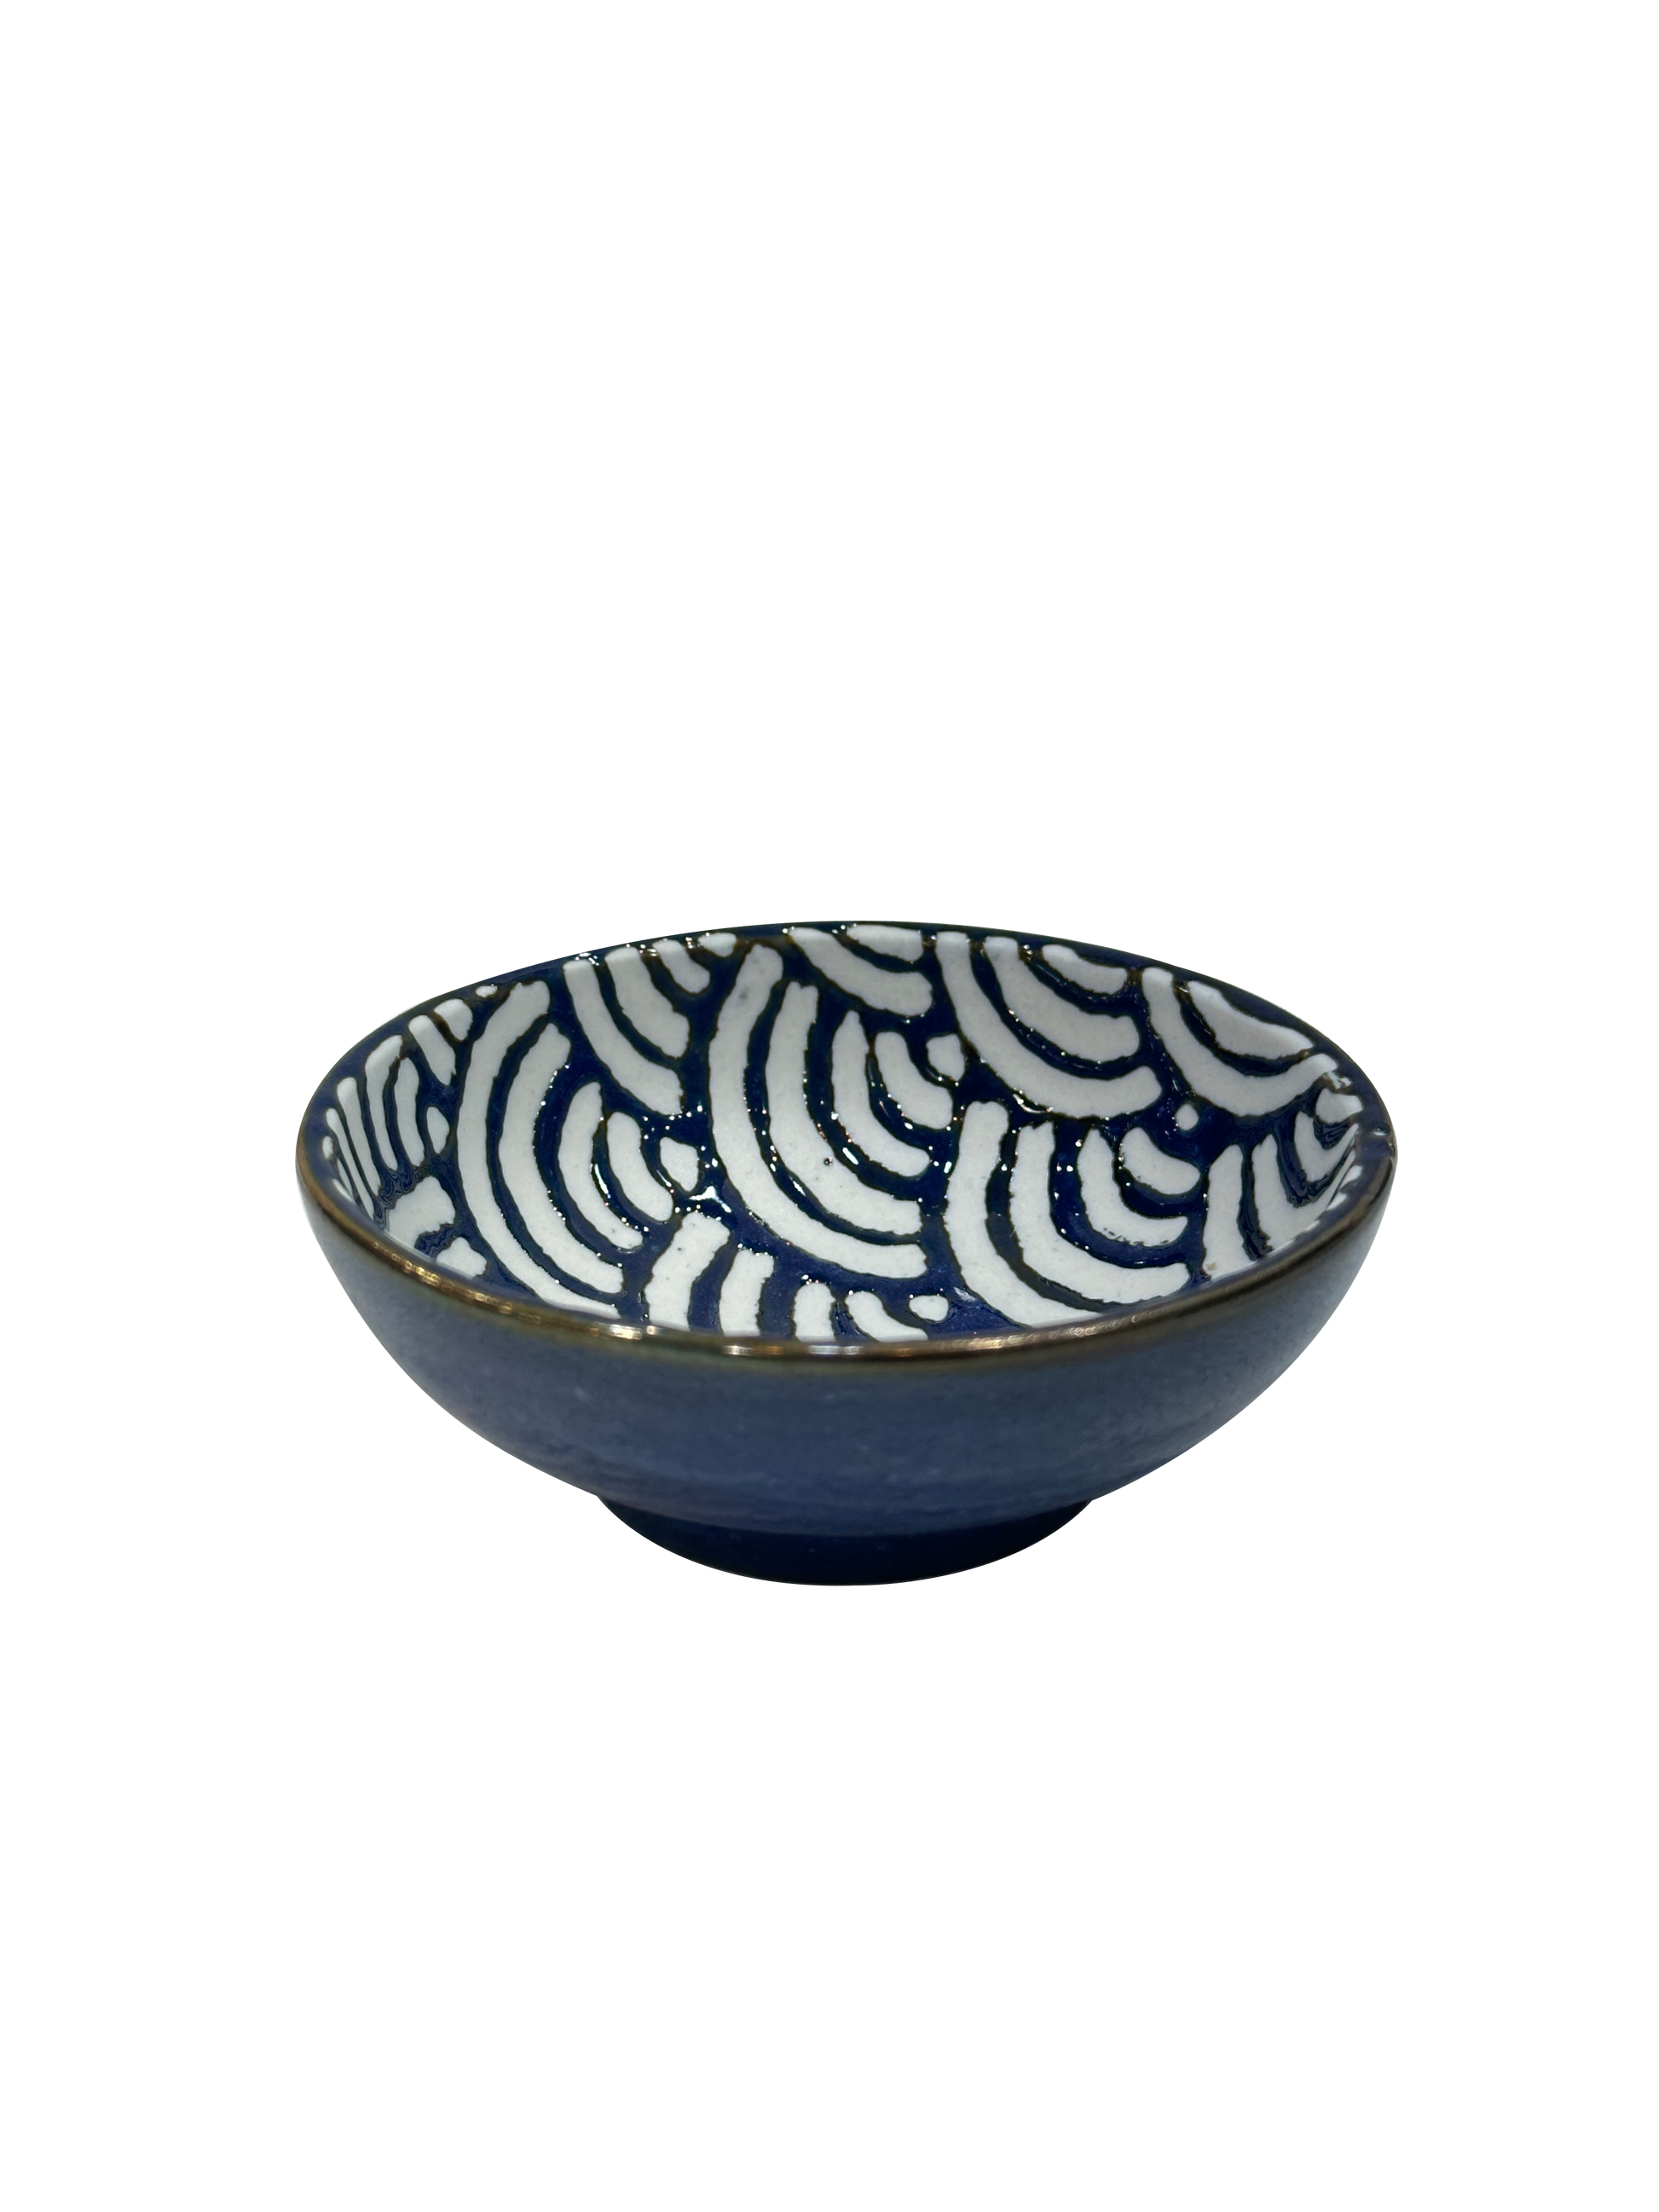 Navy Blue Classic Bowl (Set of 4) - Sunset Gifts Store